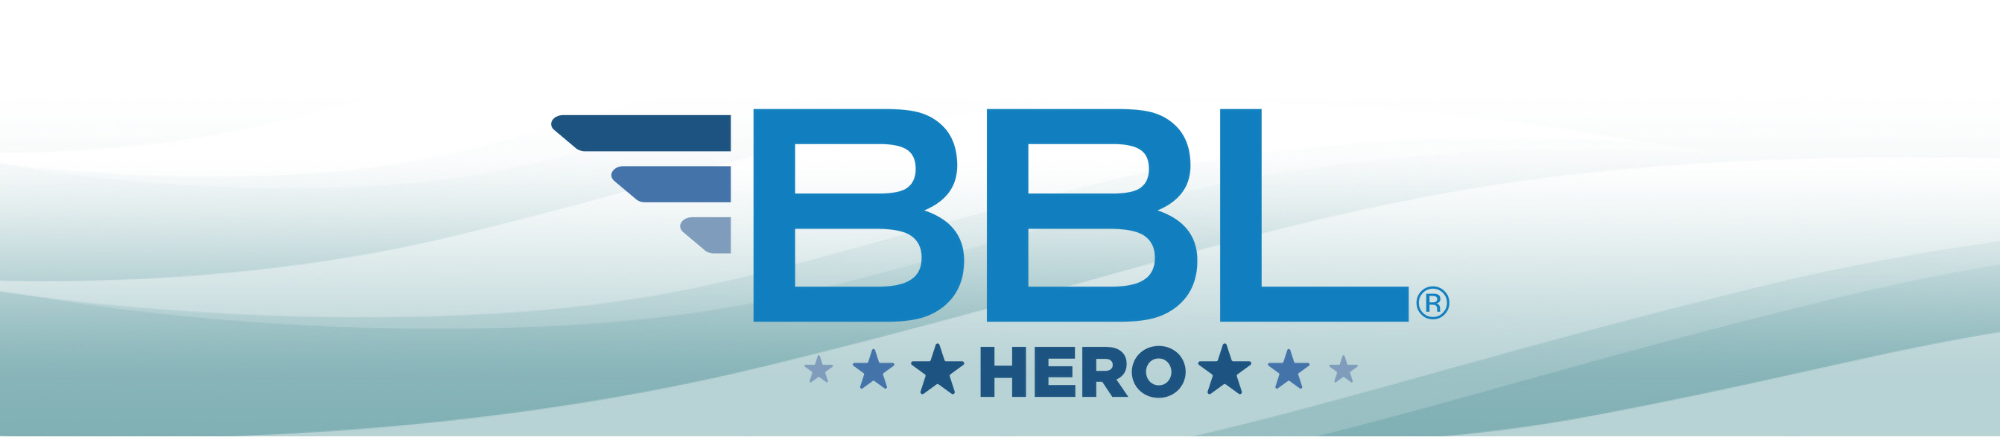 The image shows a logo with the text bbl hero in bold, uppercase letters, accompanied by five stars arranged in an ascending diagonal pattern from left to right. the logo appears to be related to a brand or product entitled bbl hero, registered with a trademark symbol. the background features an abstract wave-like design in shades of blue, giving it a calm and professional aesthetic.